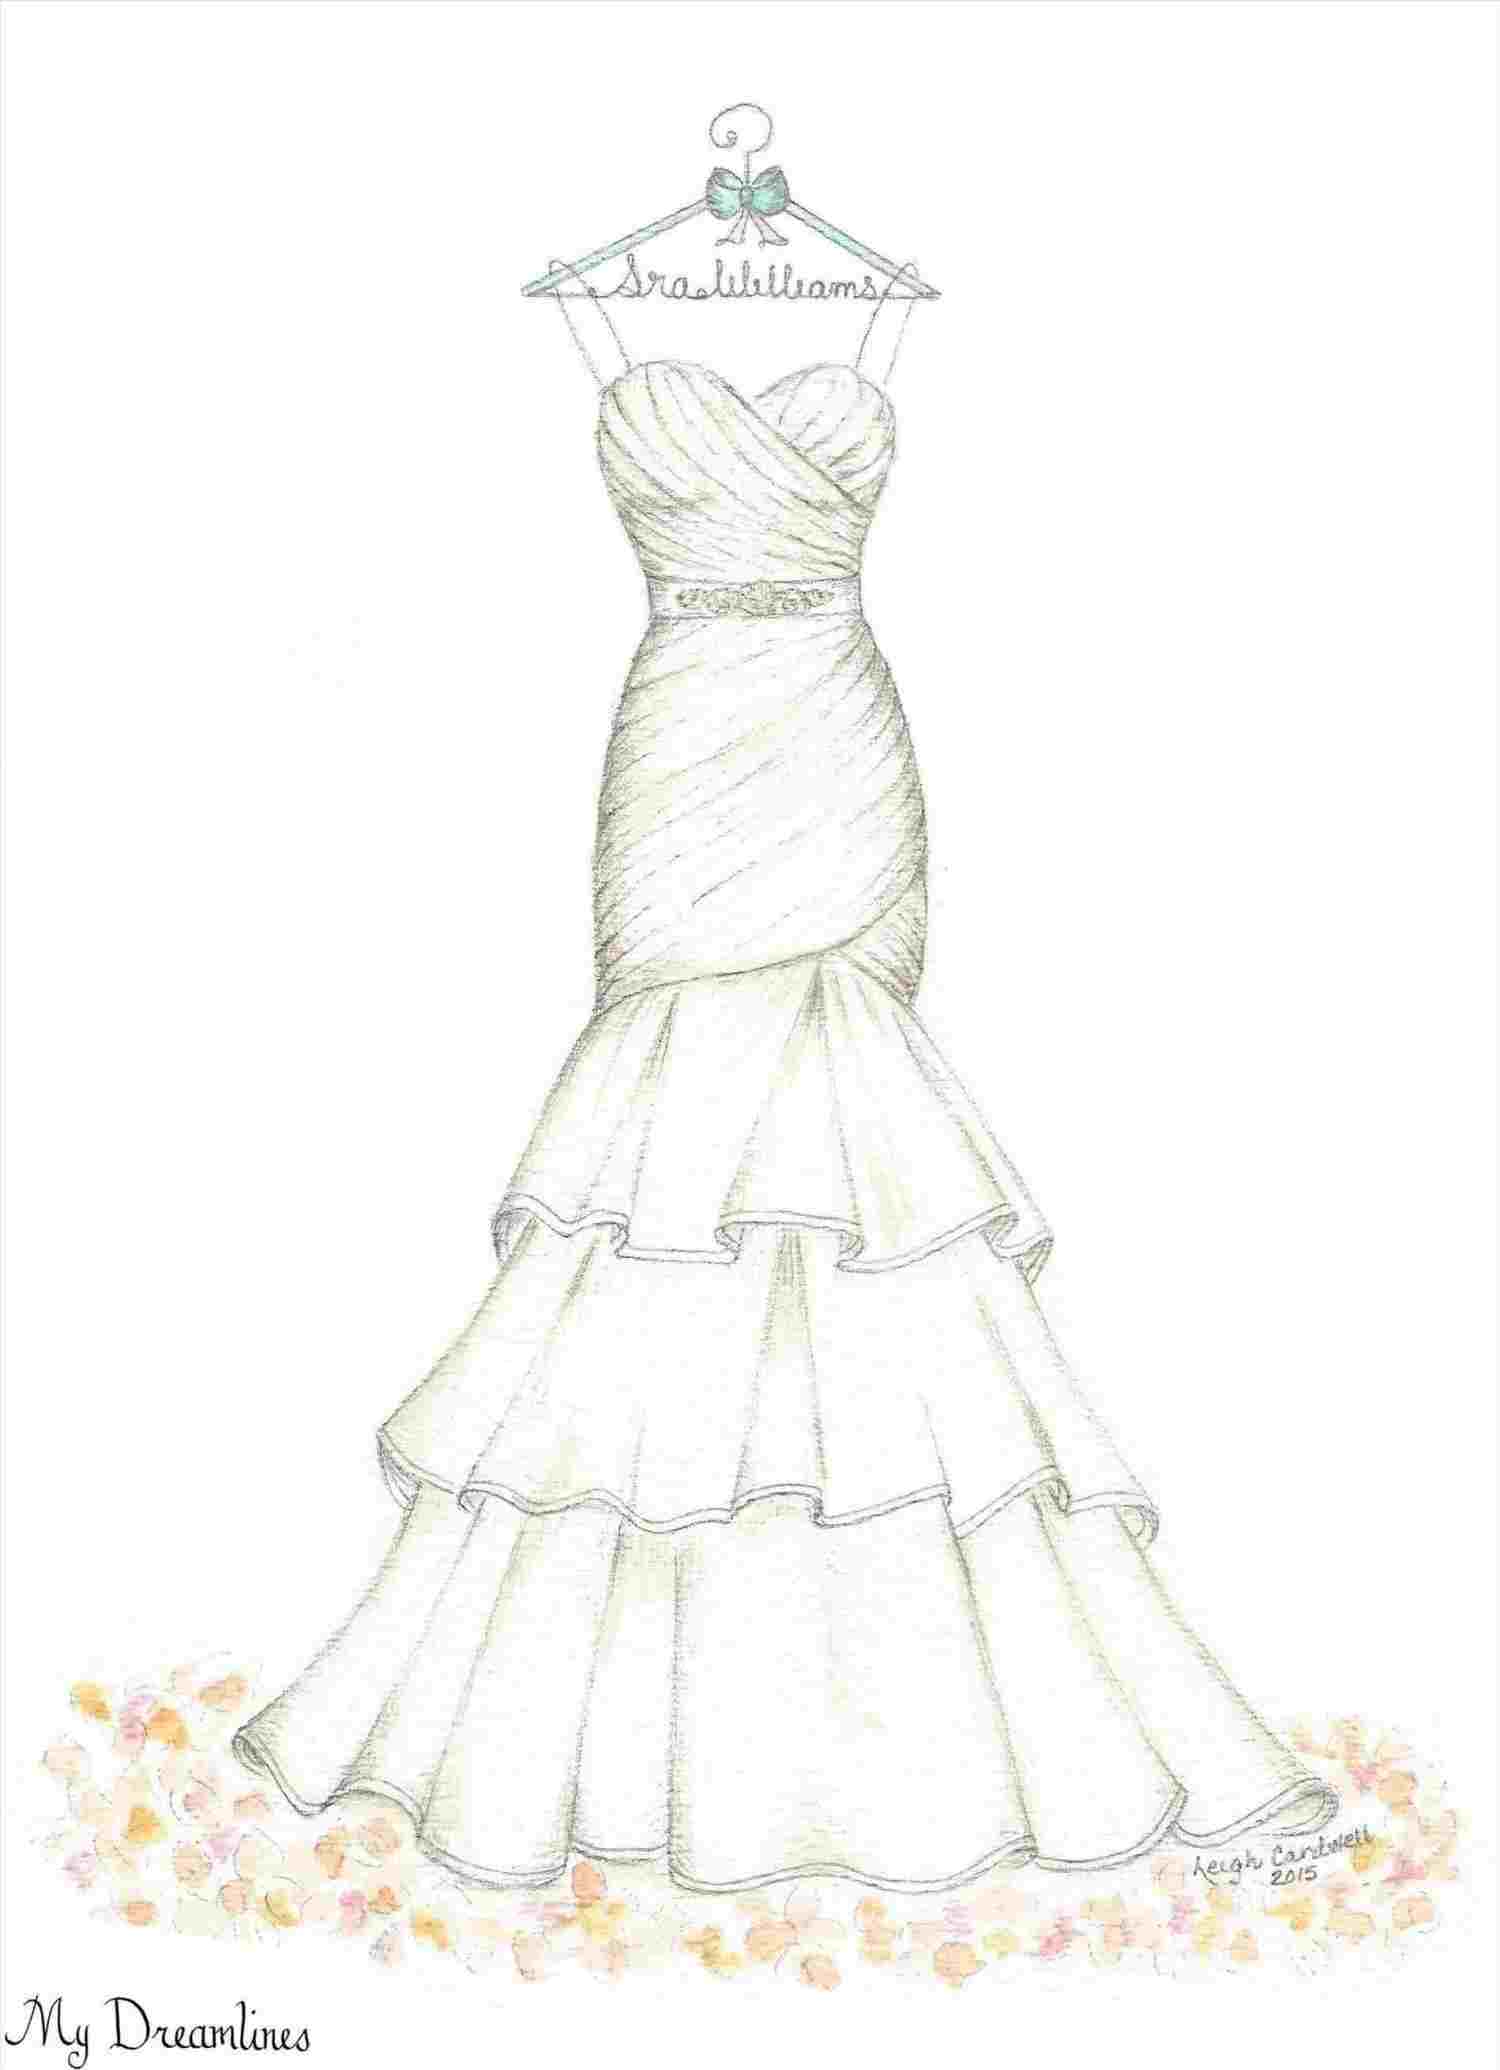 Easy Fashion Sketches at PaintingValley.com | Explore collection of